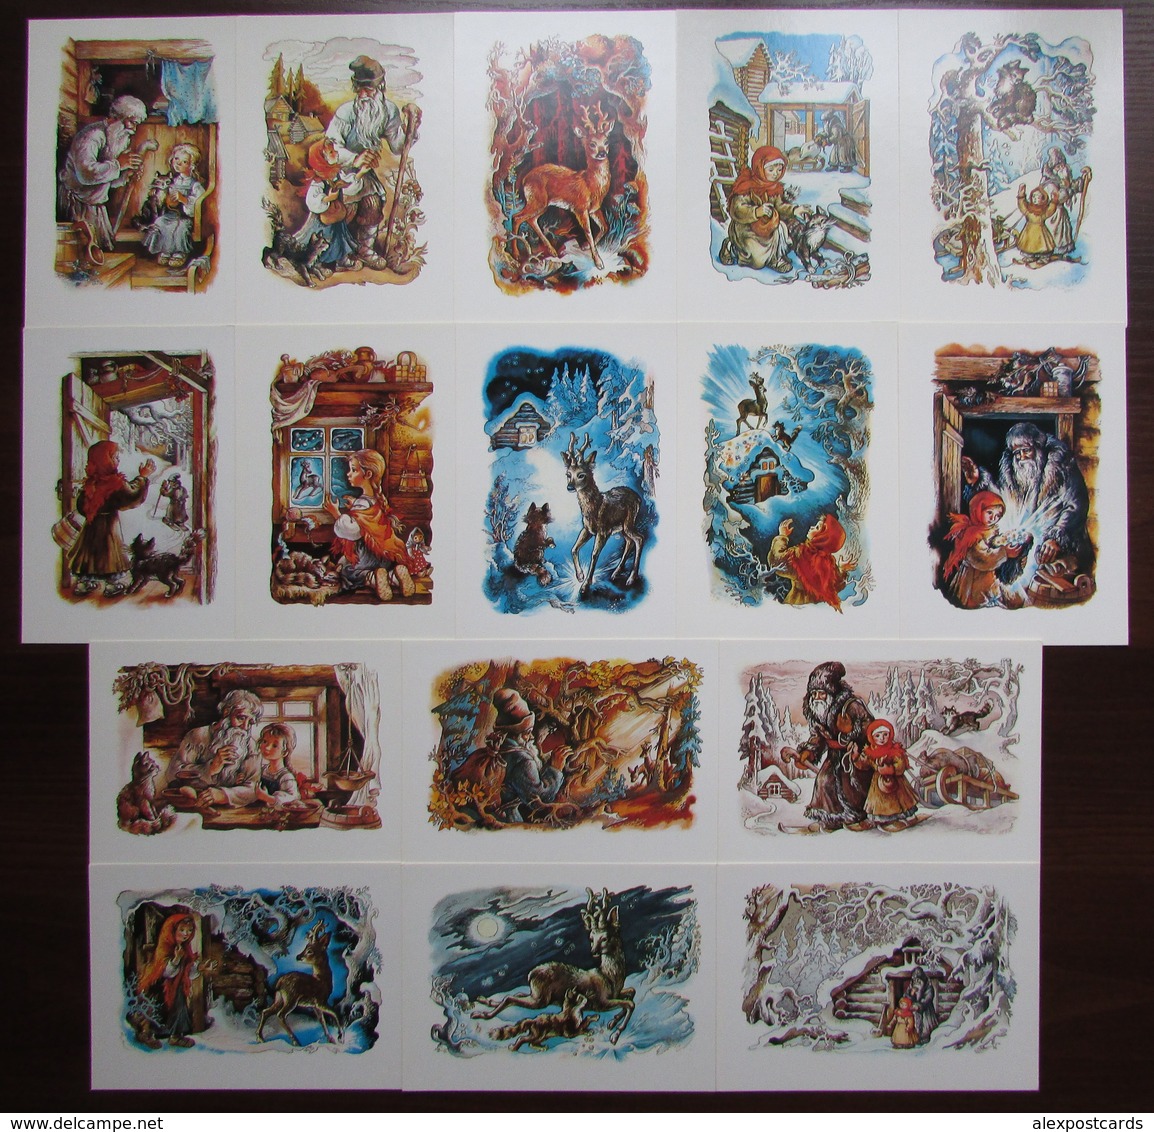 SILVER HOOF. FAIRY TALE By PAVEL BAZHOV. Set Of 16 Postcards In Folder. USSR, 1985 - Contes, Fables & Légendes